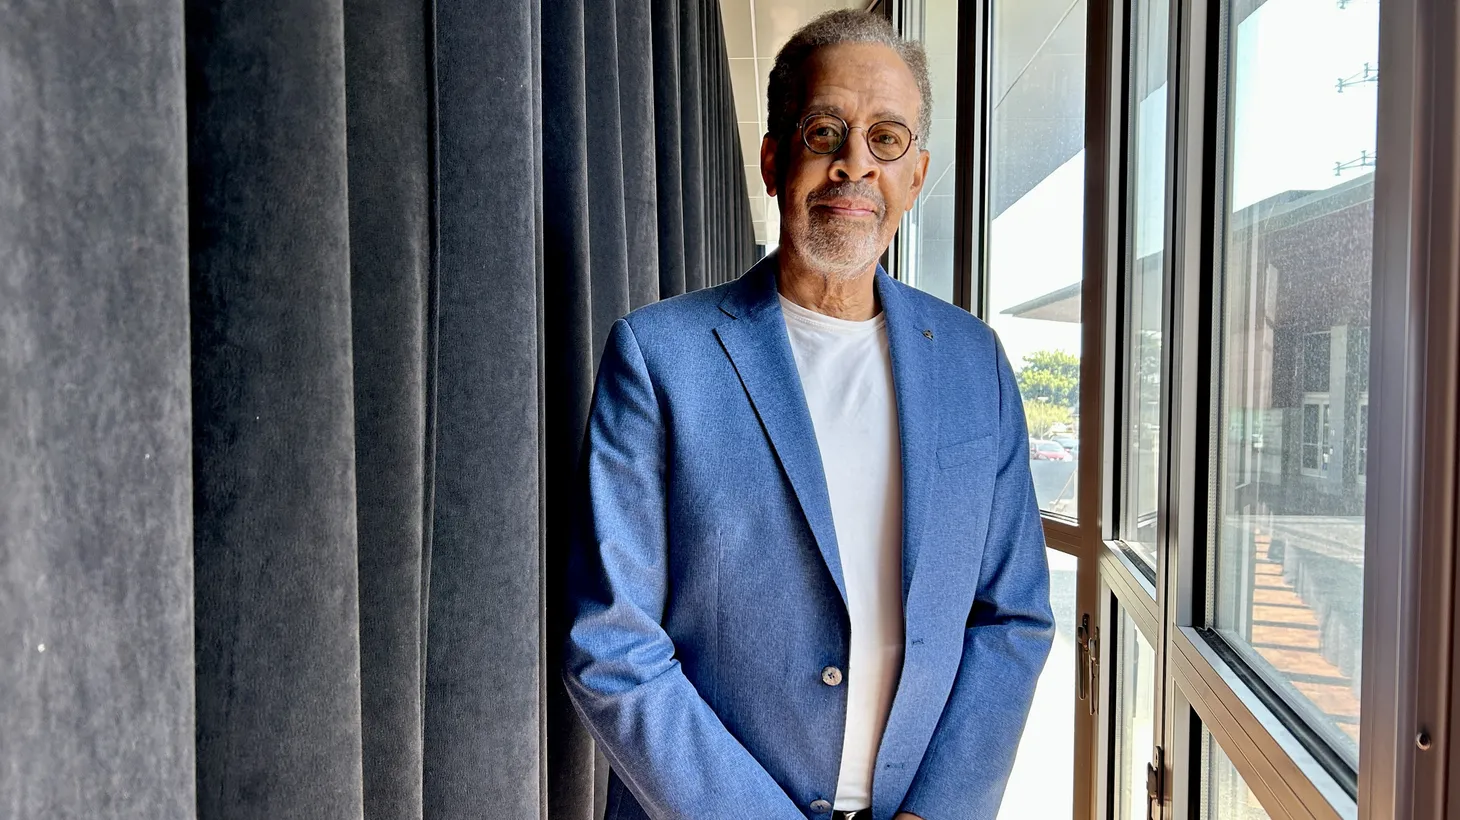 “I started at 18 playing with really serious musicians. And if a lot of those guys didn't take time to show me certain things like, ‘Stanley don't do it this way, try it this way,’ I might not have turned out to be the musician that I am now,” says Stanley Clarke.